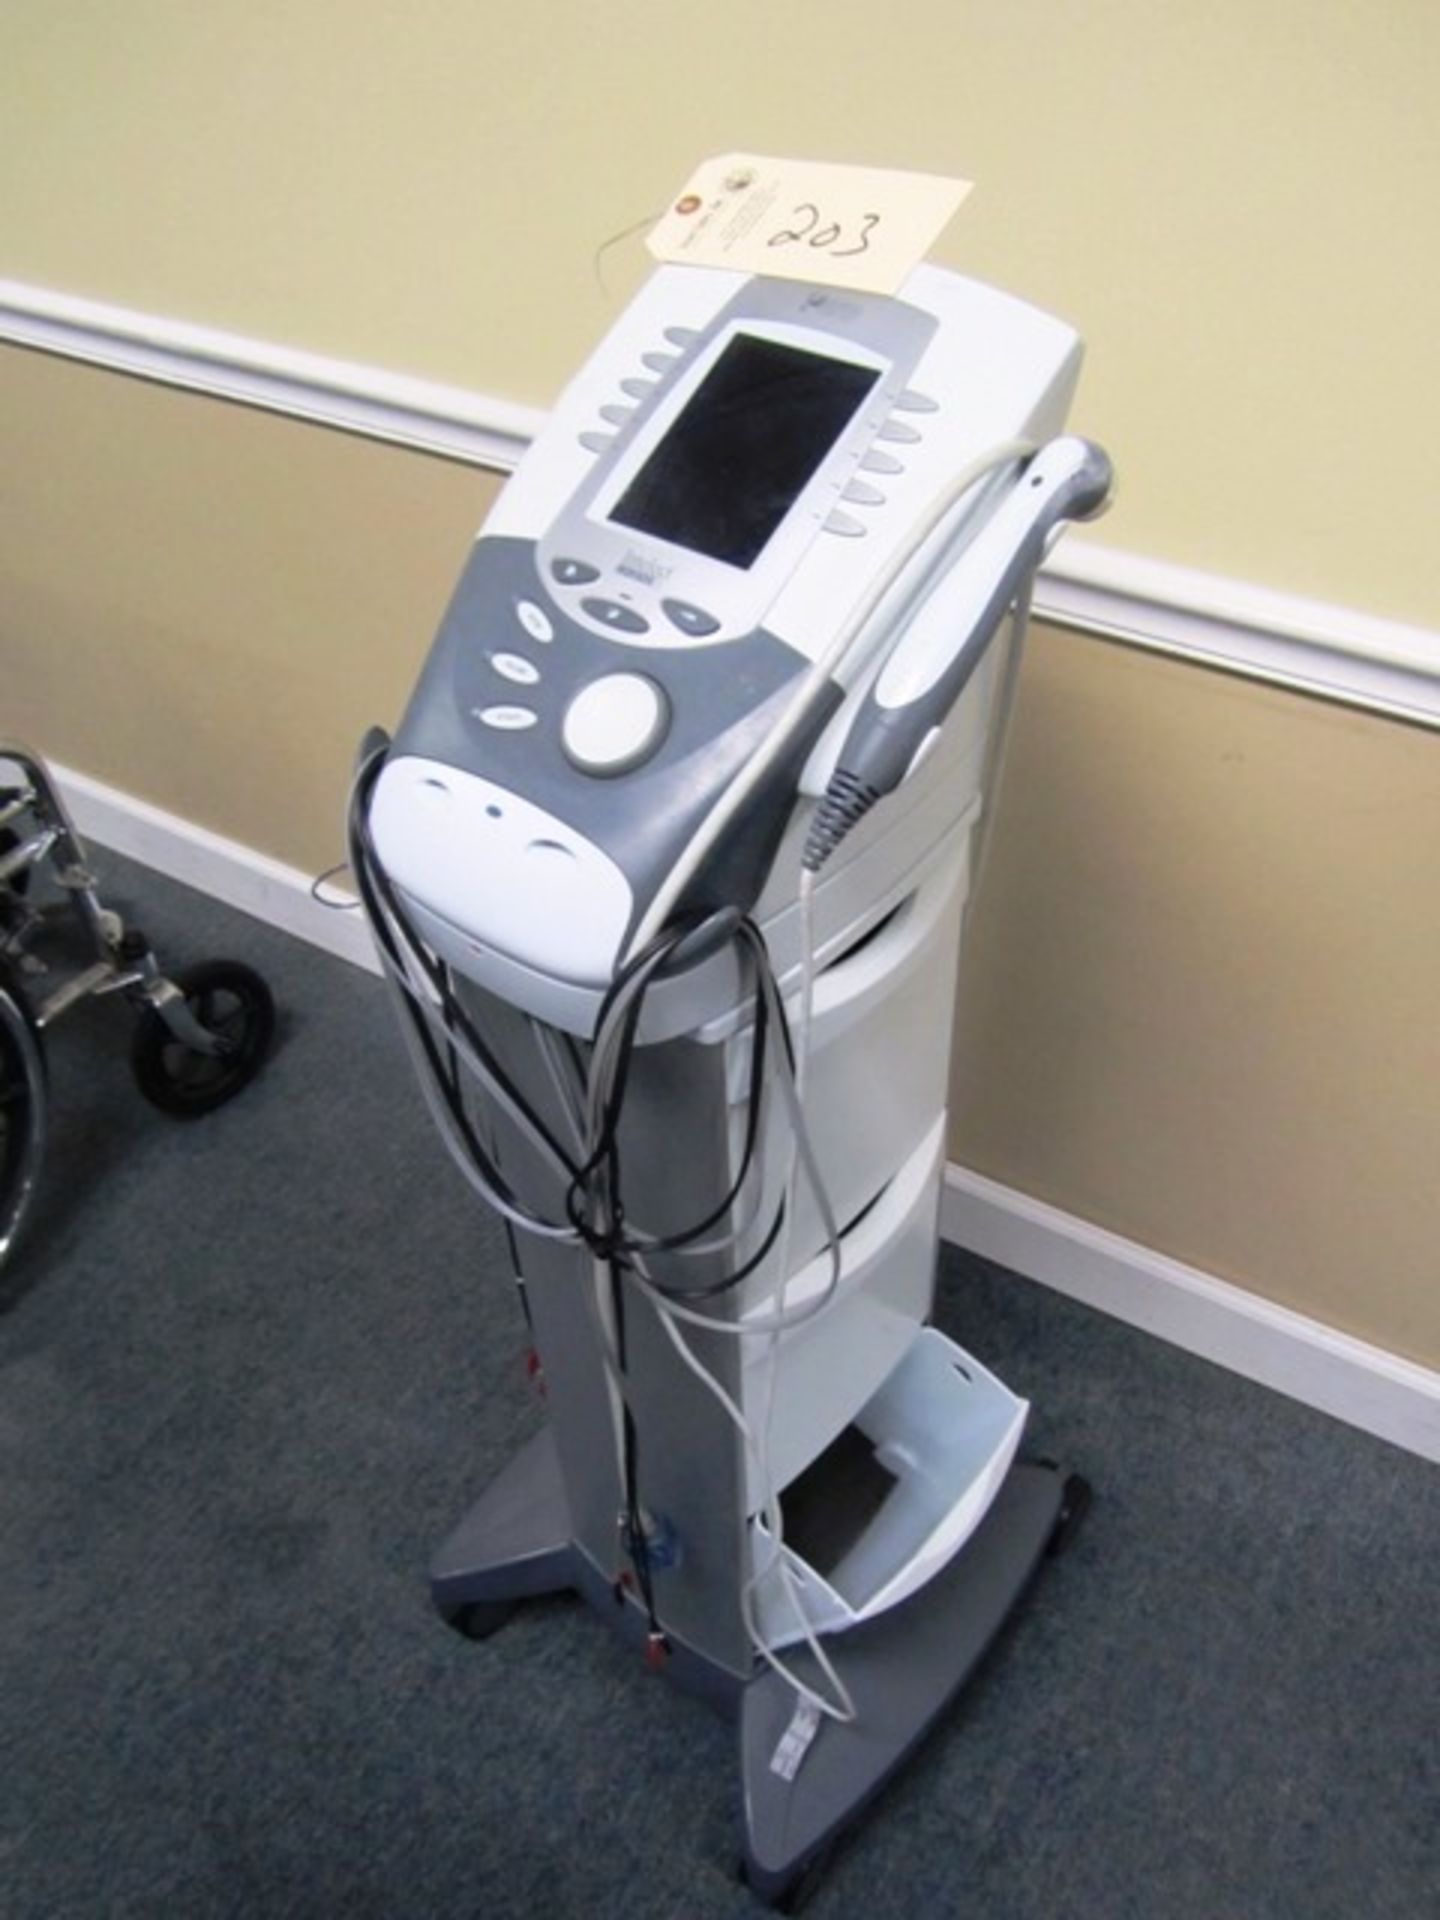 Chattanooga Intelect Legend XT Portable Electrotherapy with Ultrasound / Electrical Stimulation